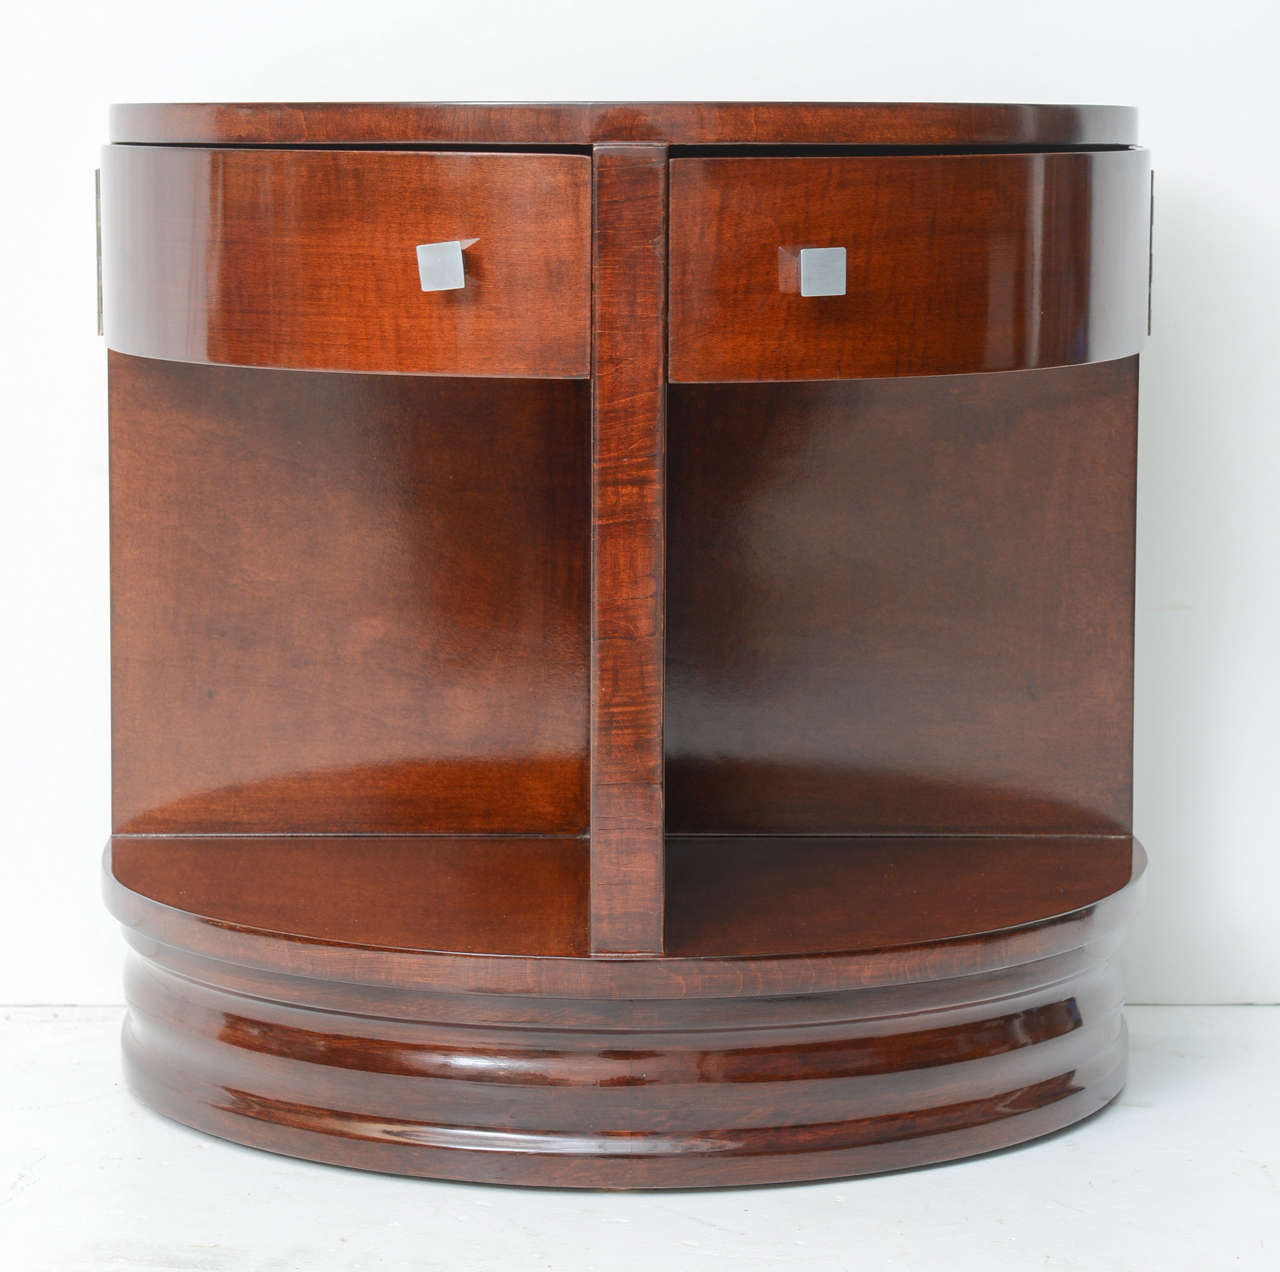 Mahogany Pair of American Art Deco Style Demilune Side Tables by Widdicomb Furniture